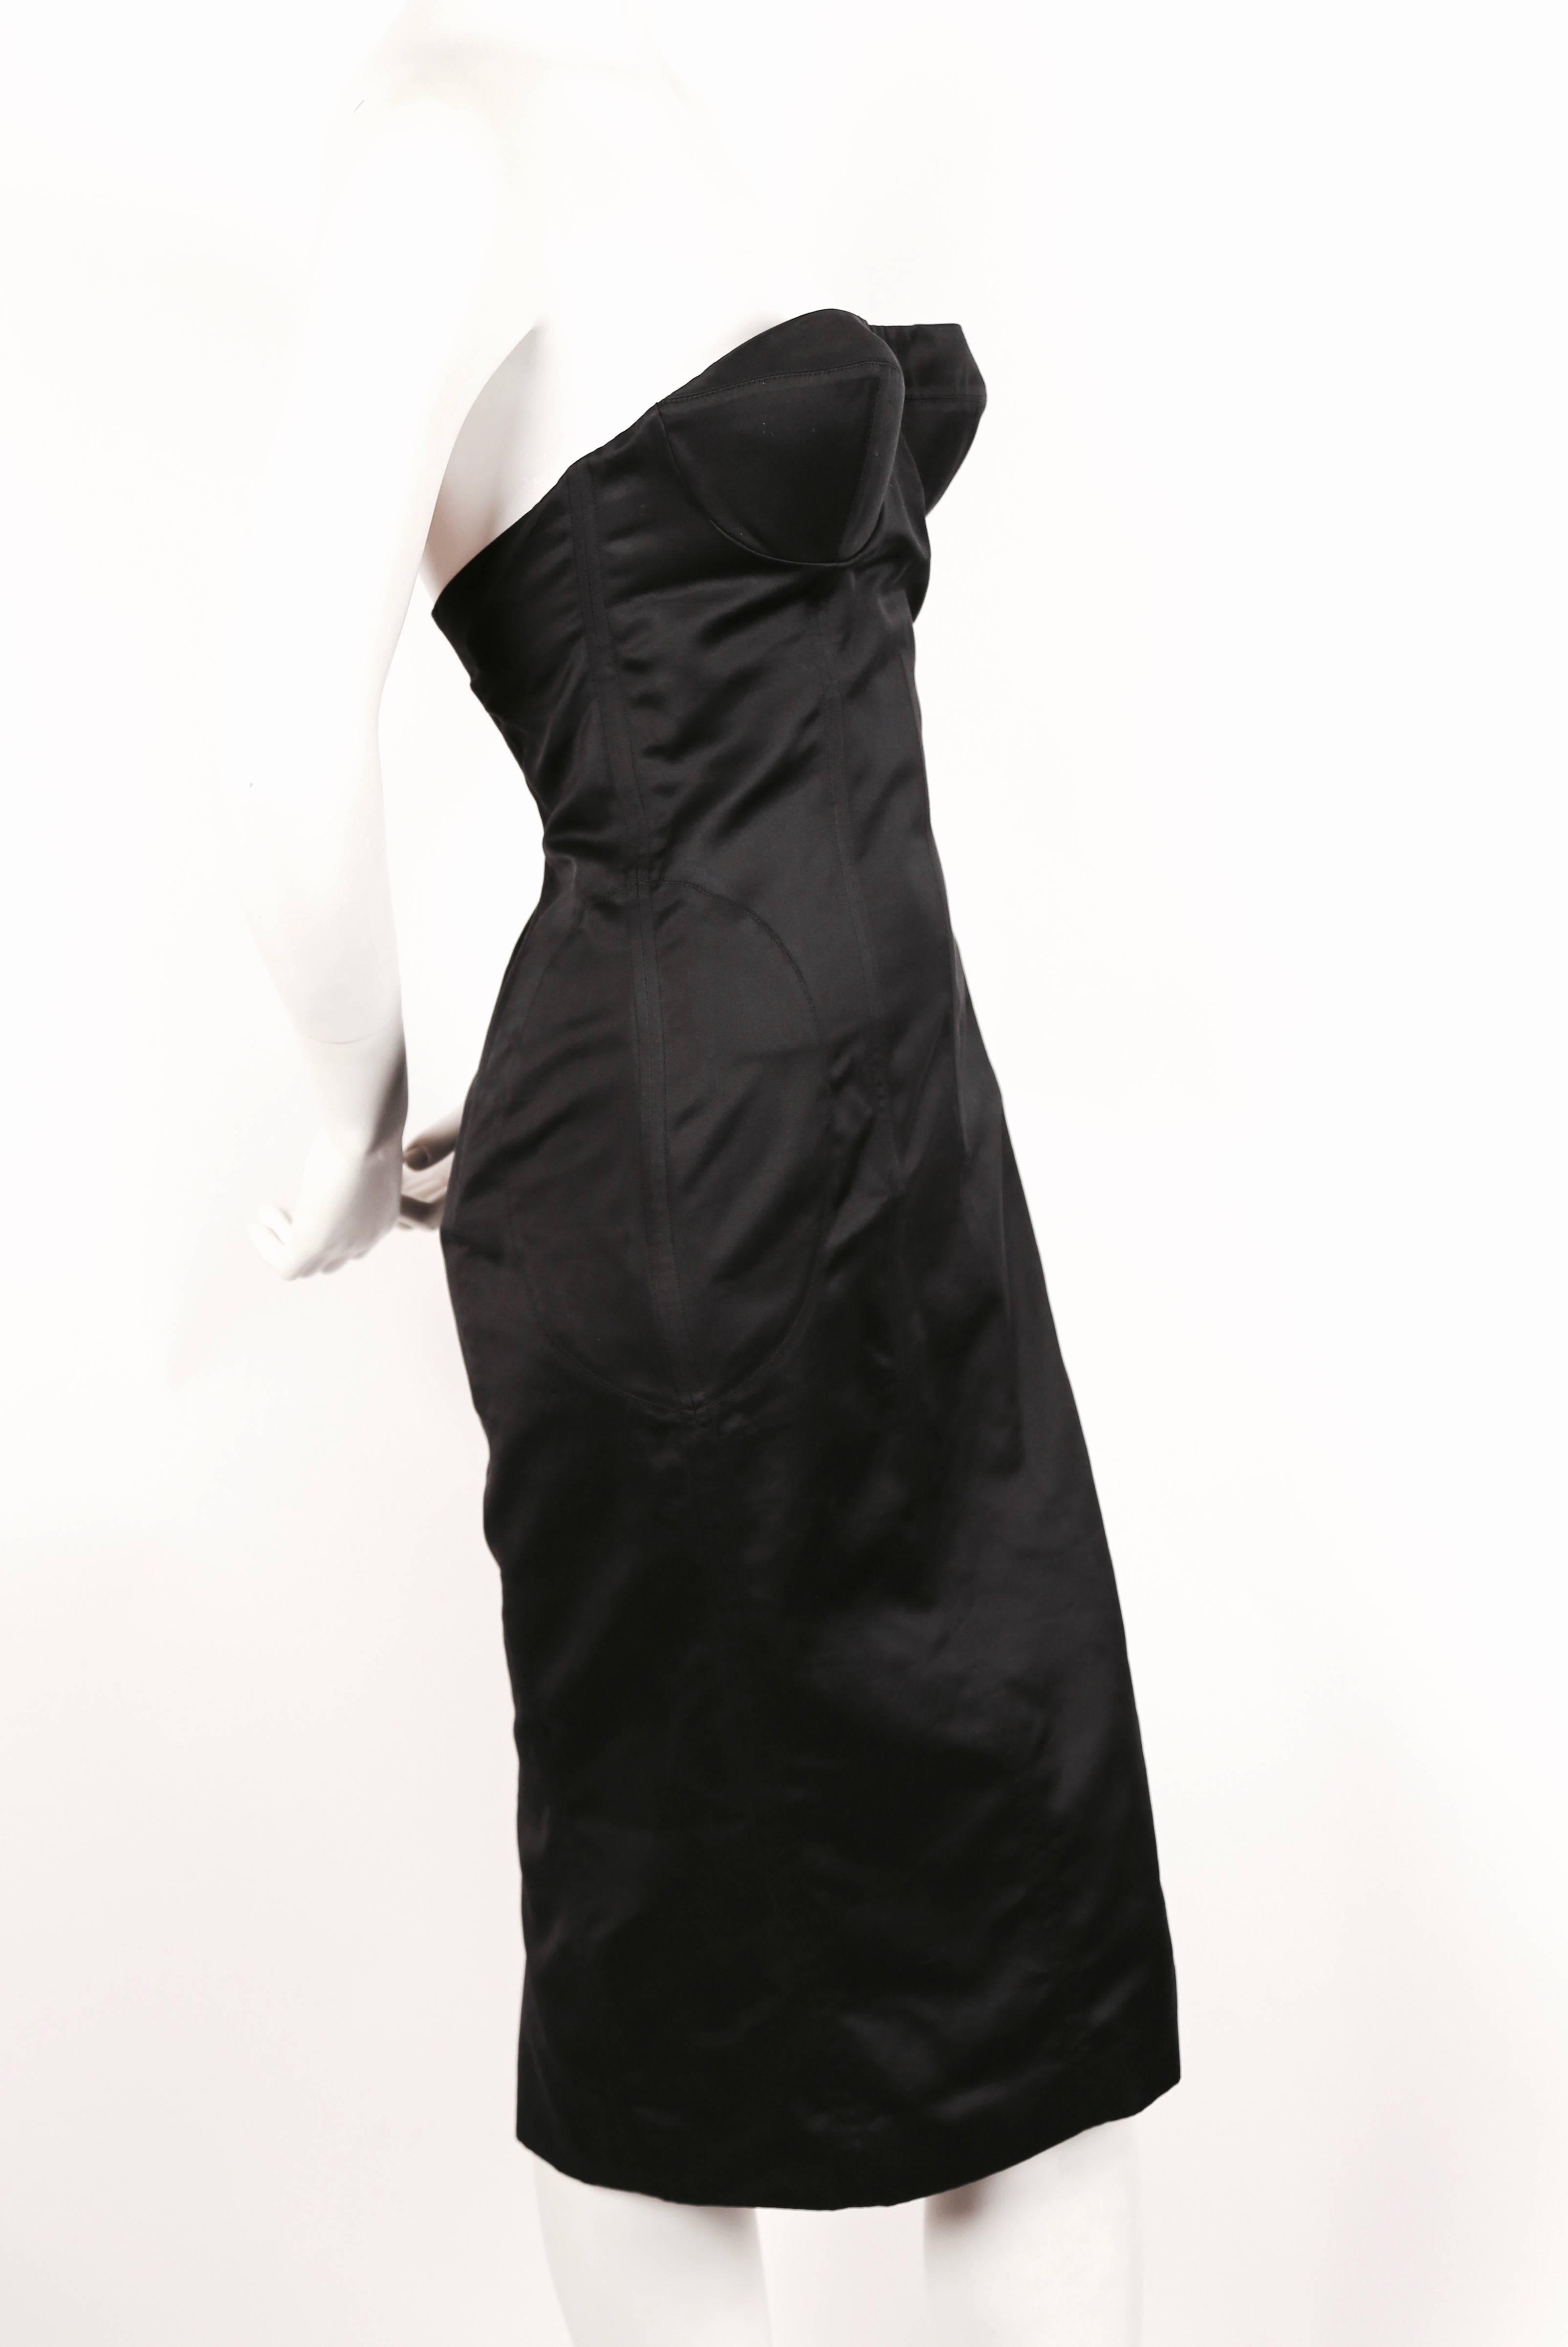 Charcoal grey strapless bustier dress with boning designed by Tom Ford for Gucci dating to spring of 2001. Labeled an Italian size 40. Approximate measurements: bust 34